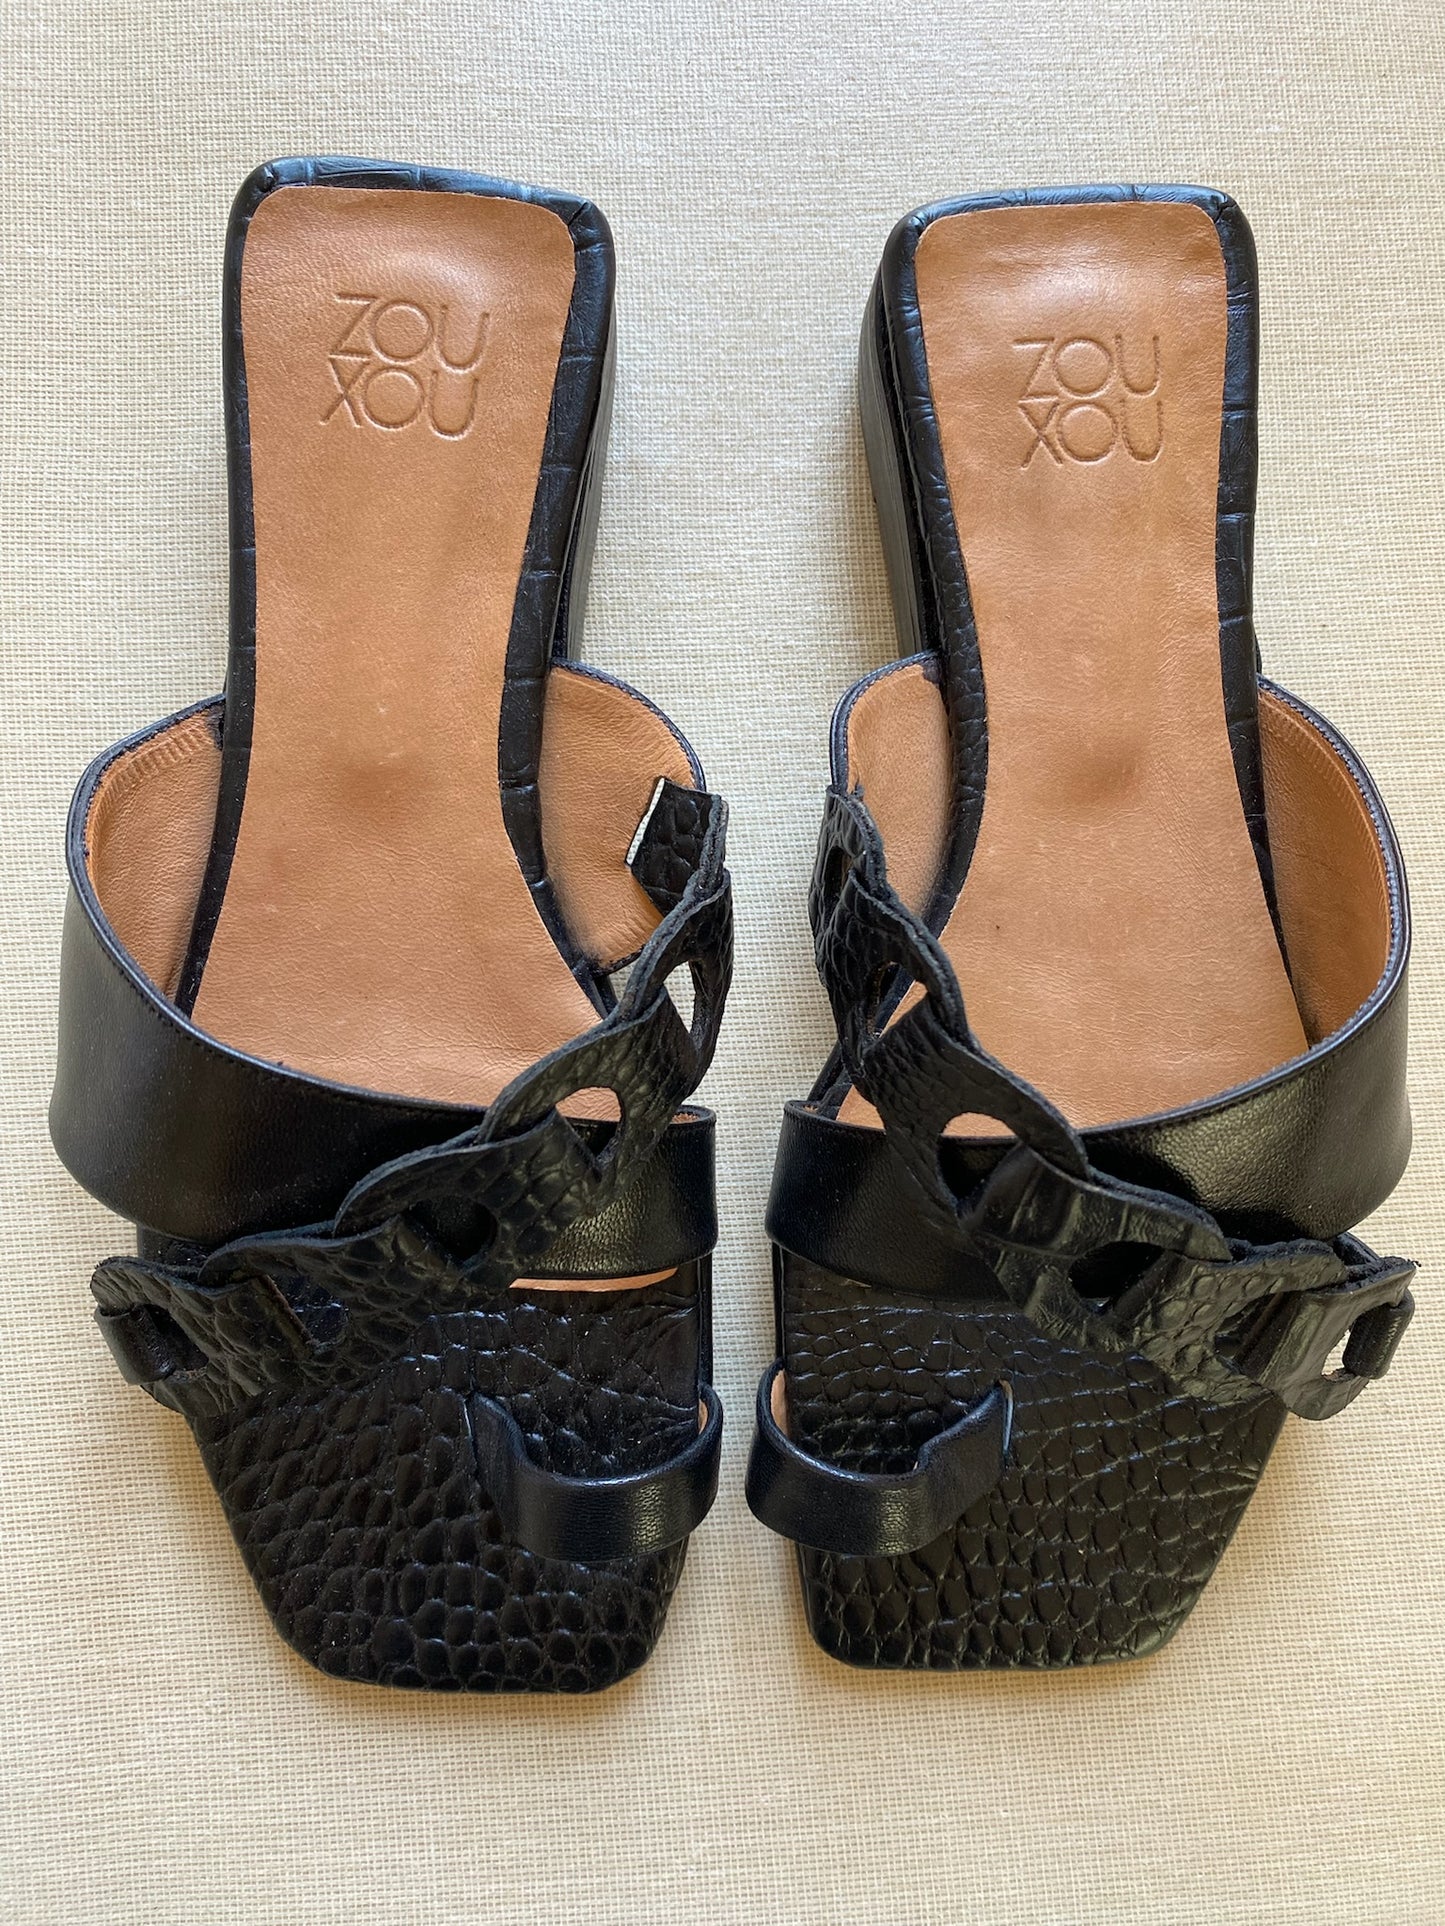 Río Toe Ring Thong Sandal in Black/Croco Size 36